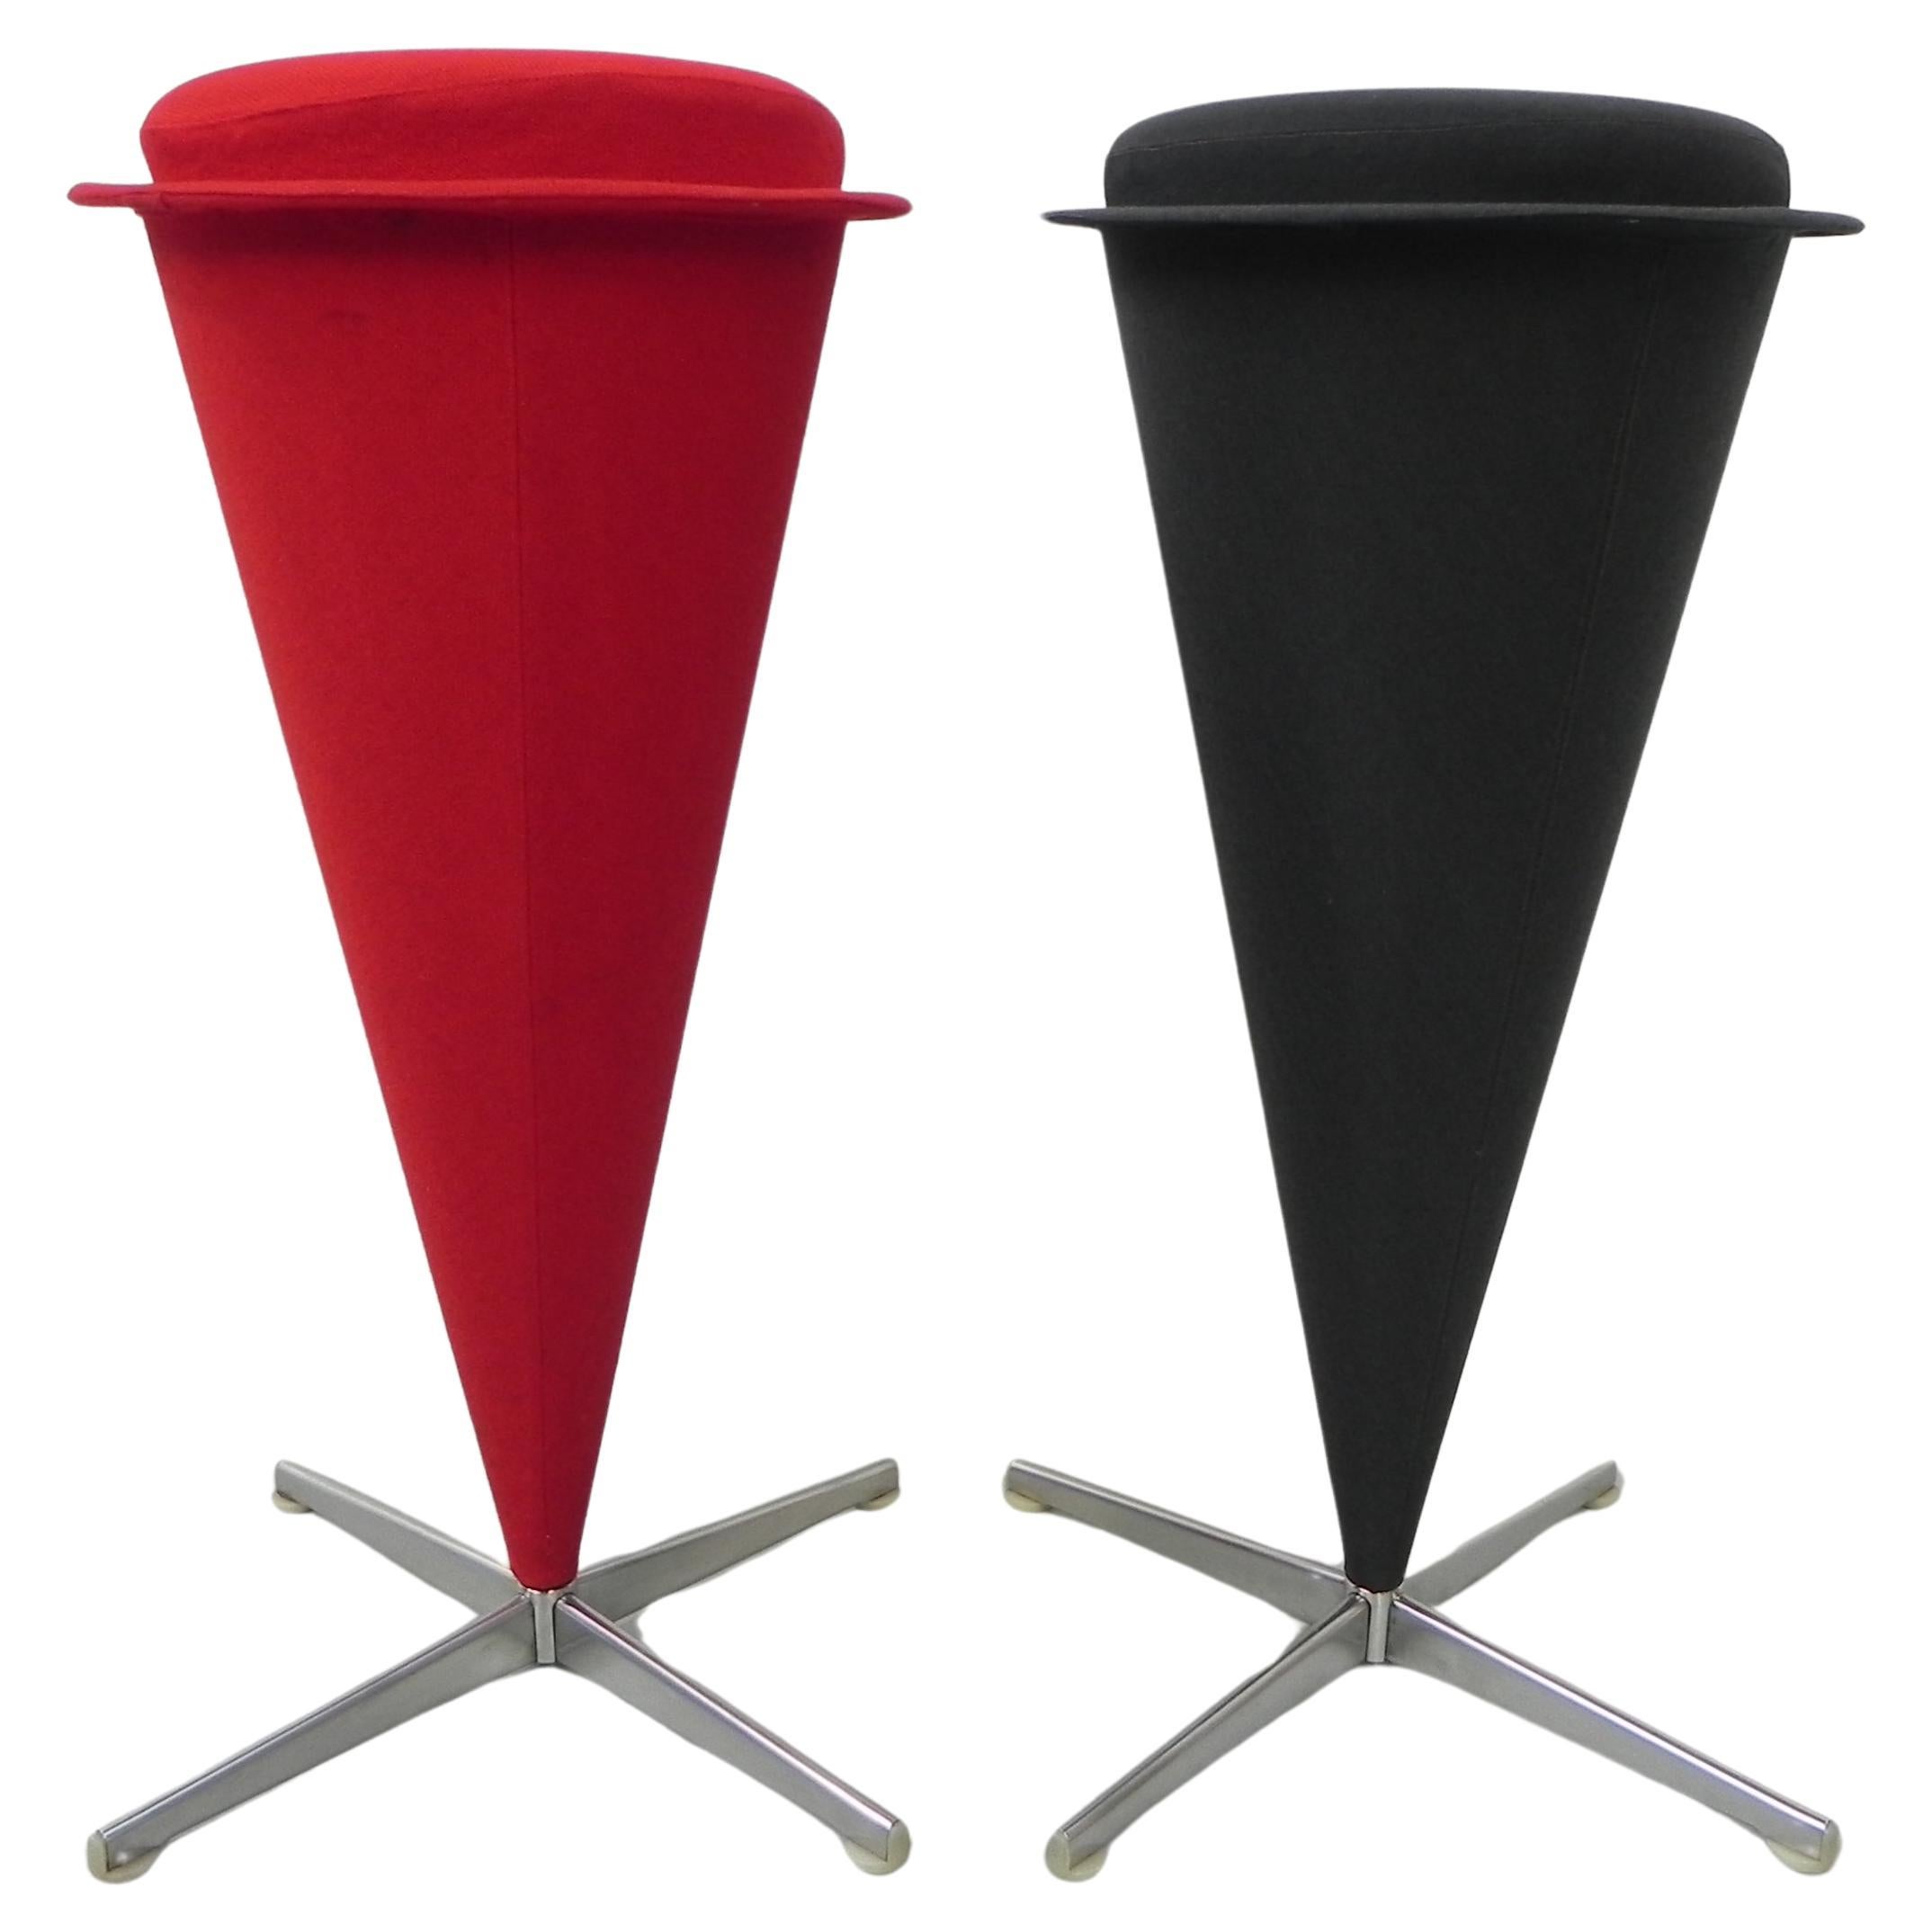 Set of 2 stools Verner Panton, Cone stools For Sale